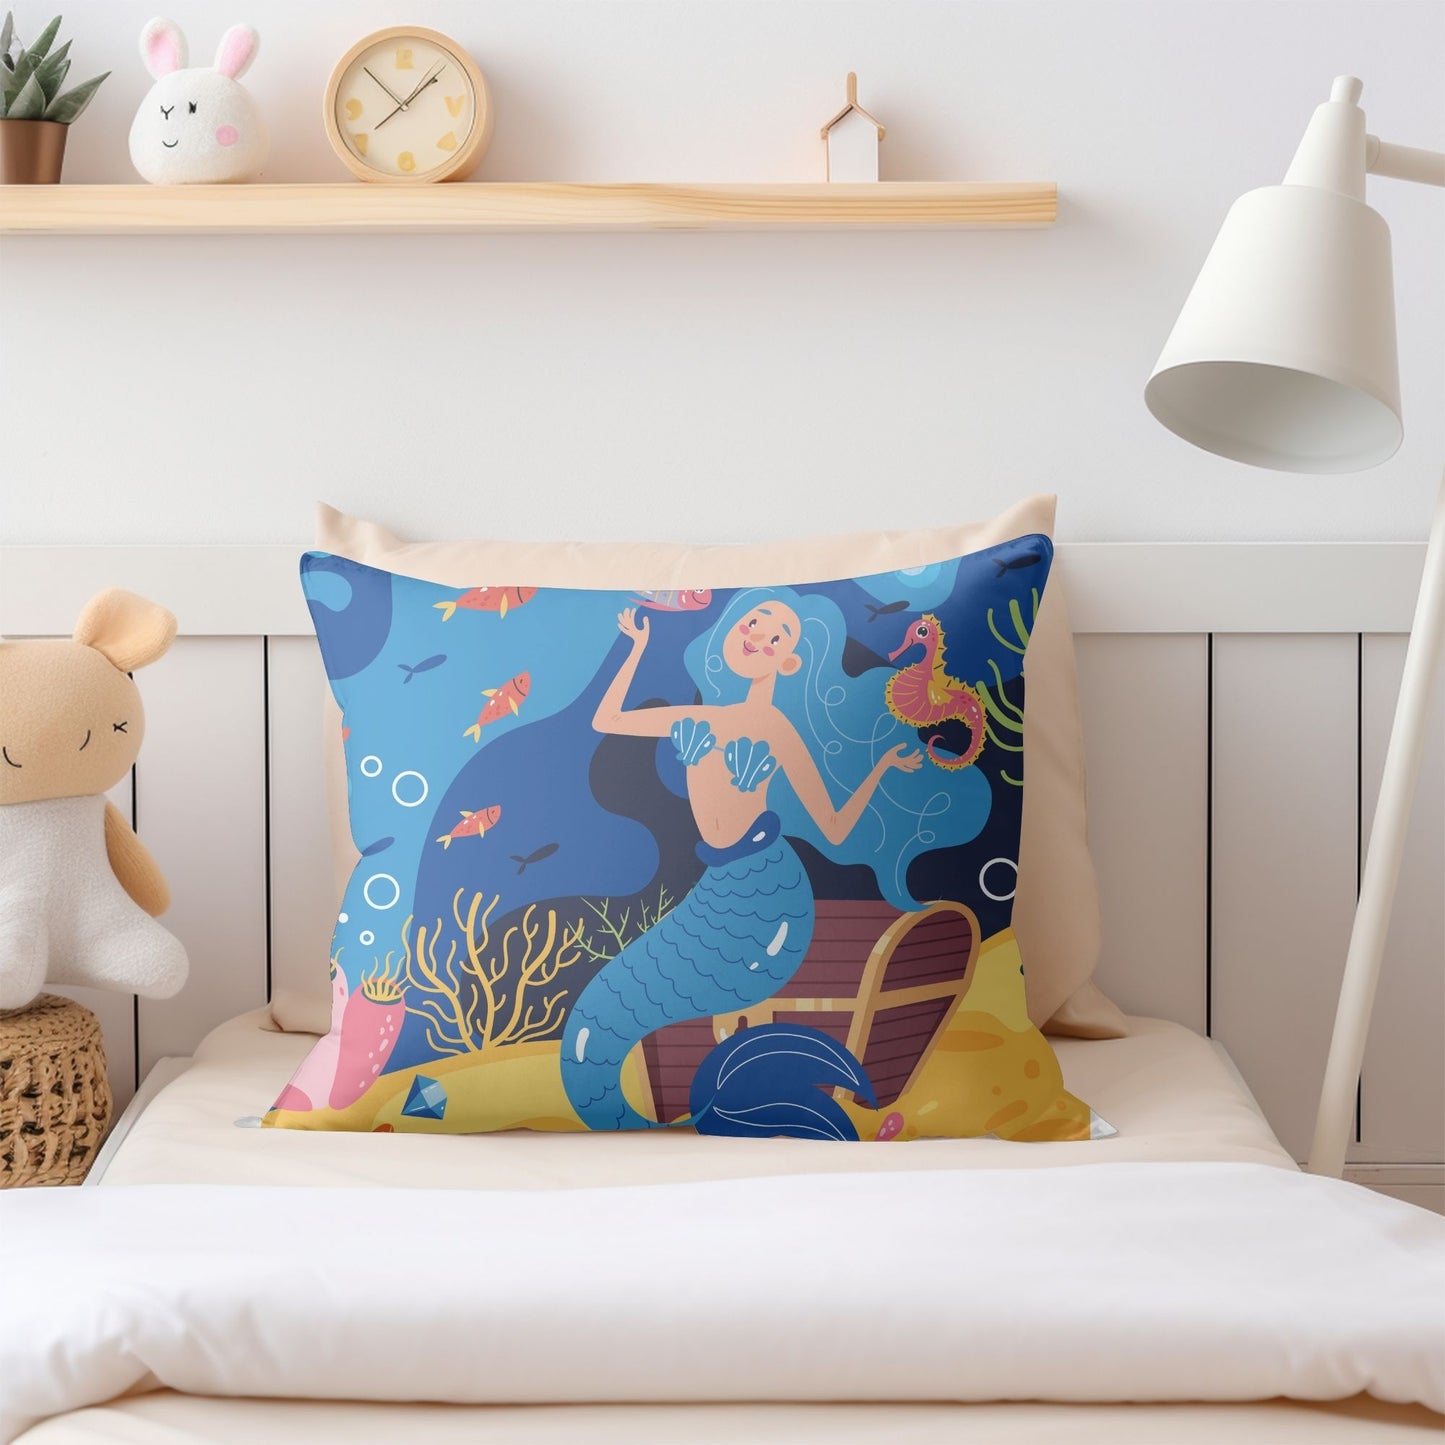 Girls room pillow featuring a whimsical mermaid pattern.